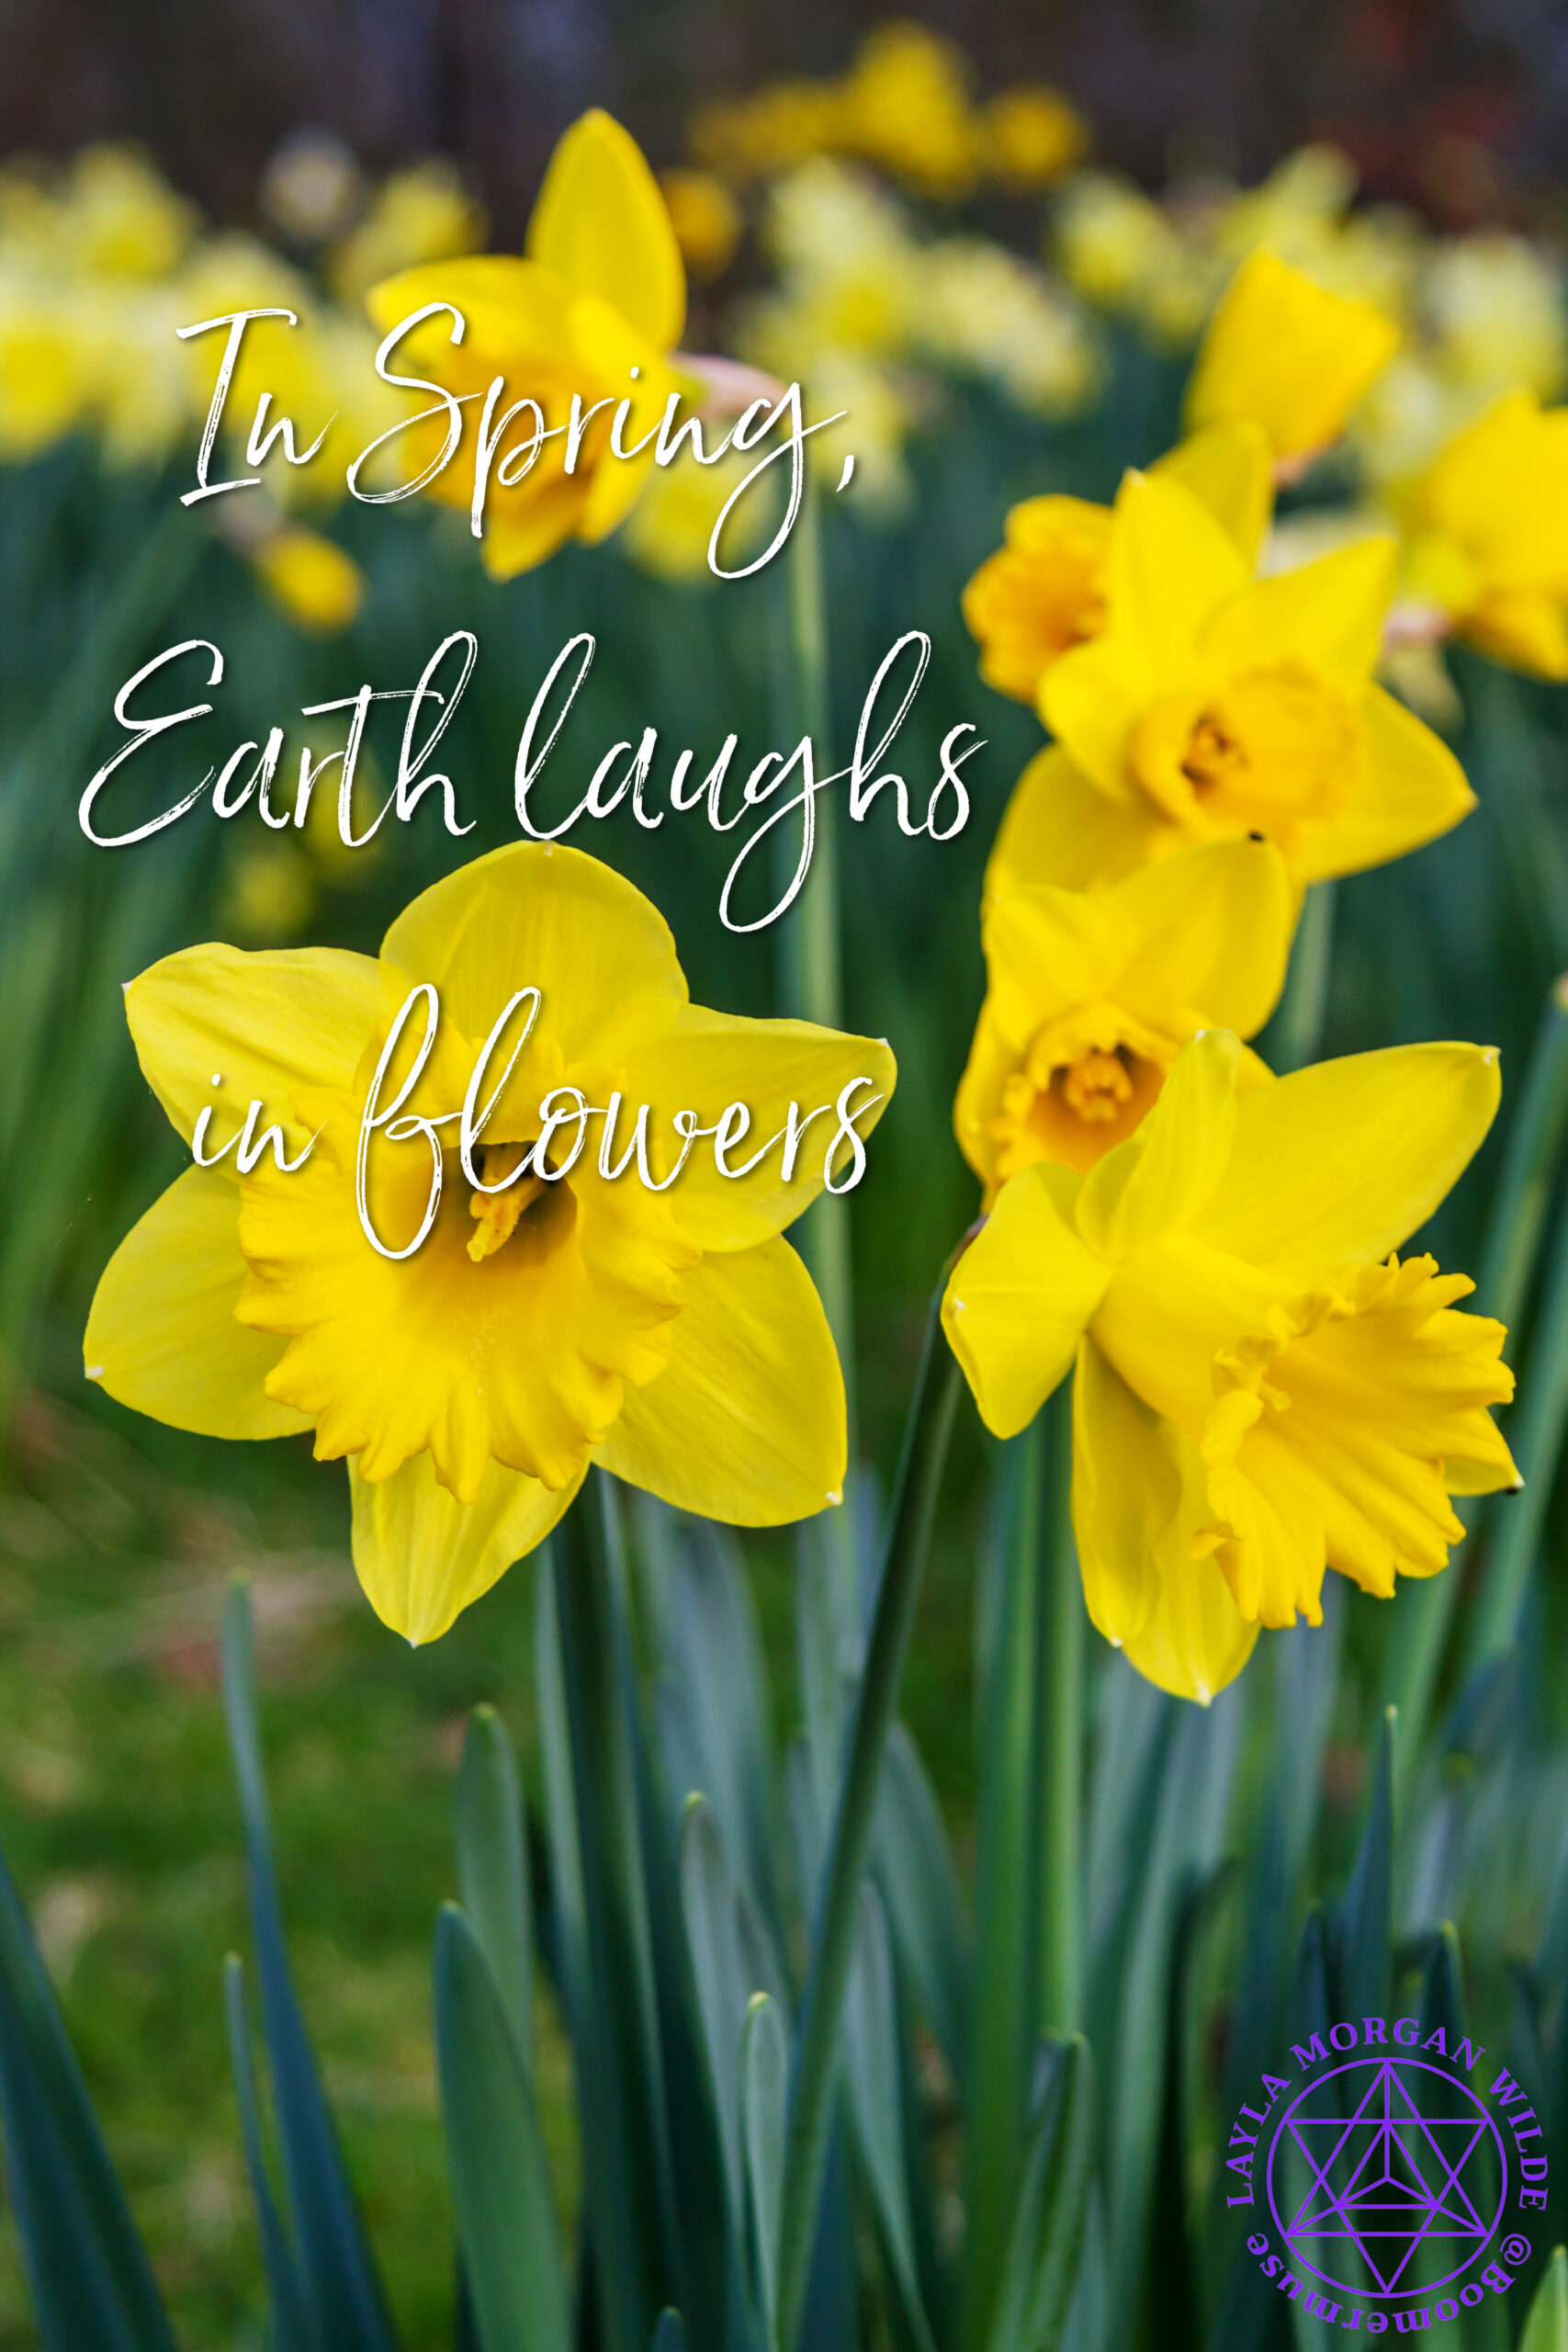 in spring, earth laughs in flowers